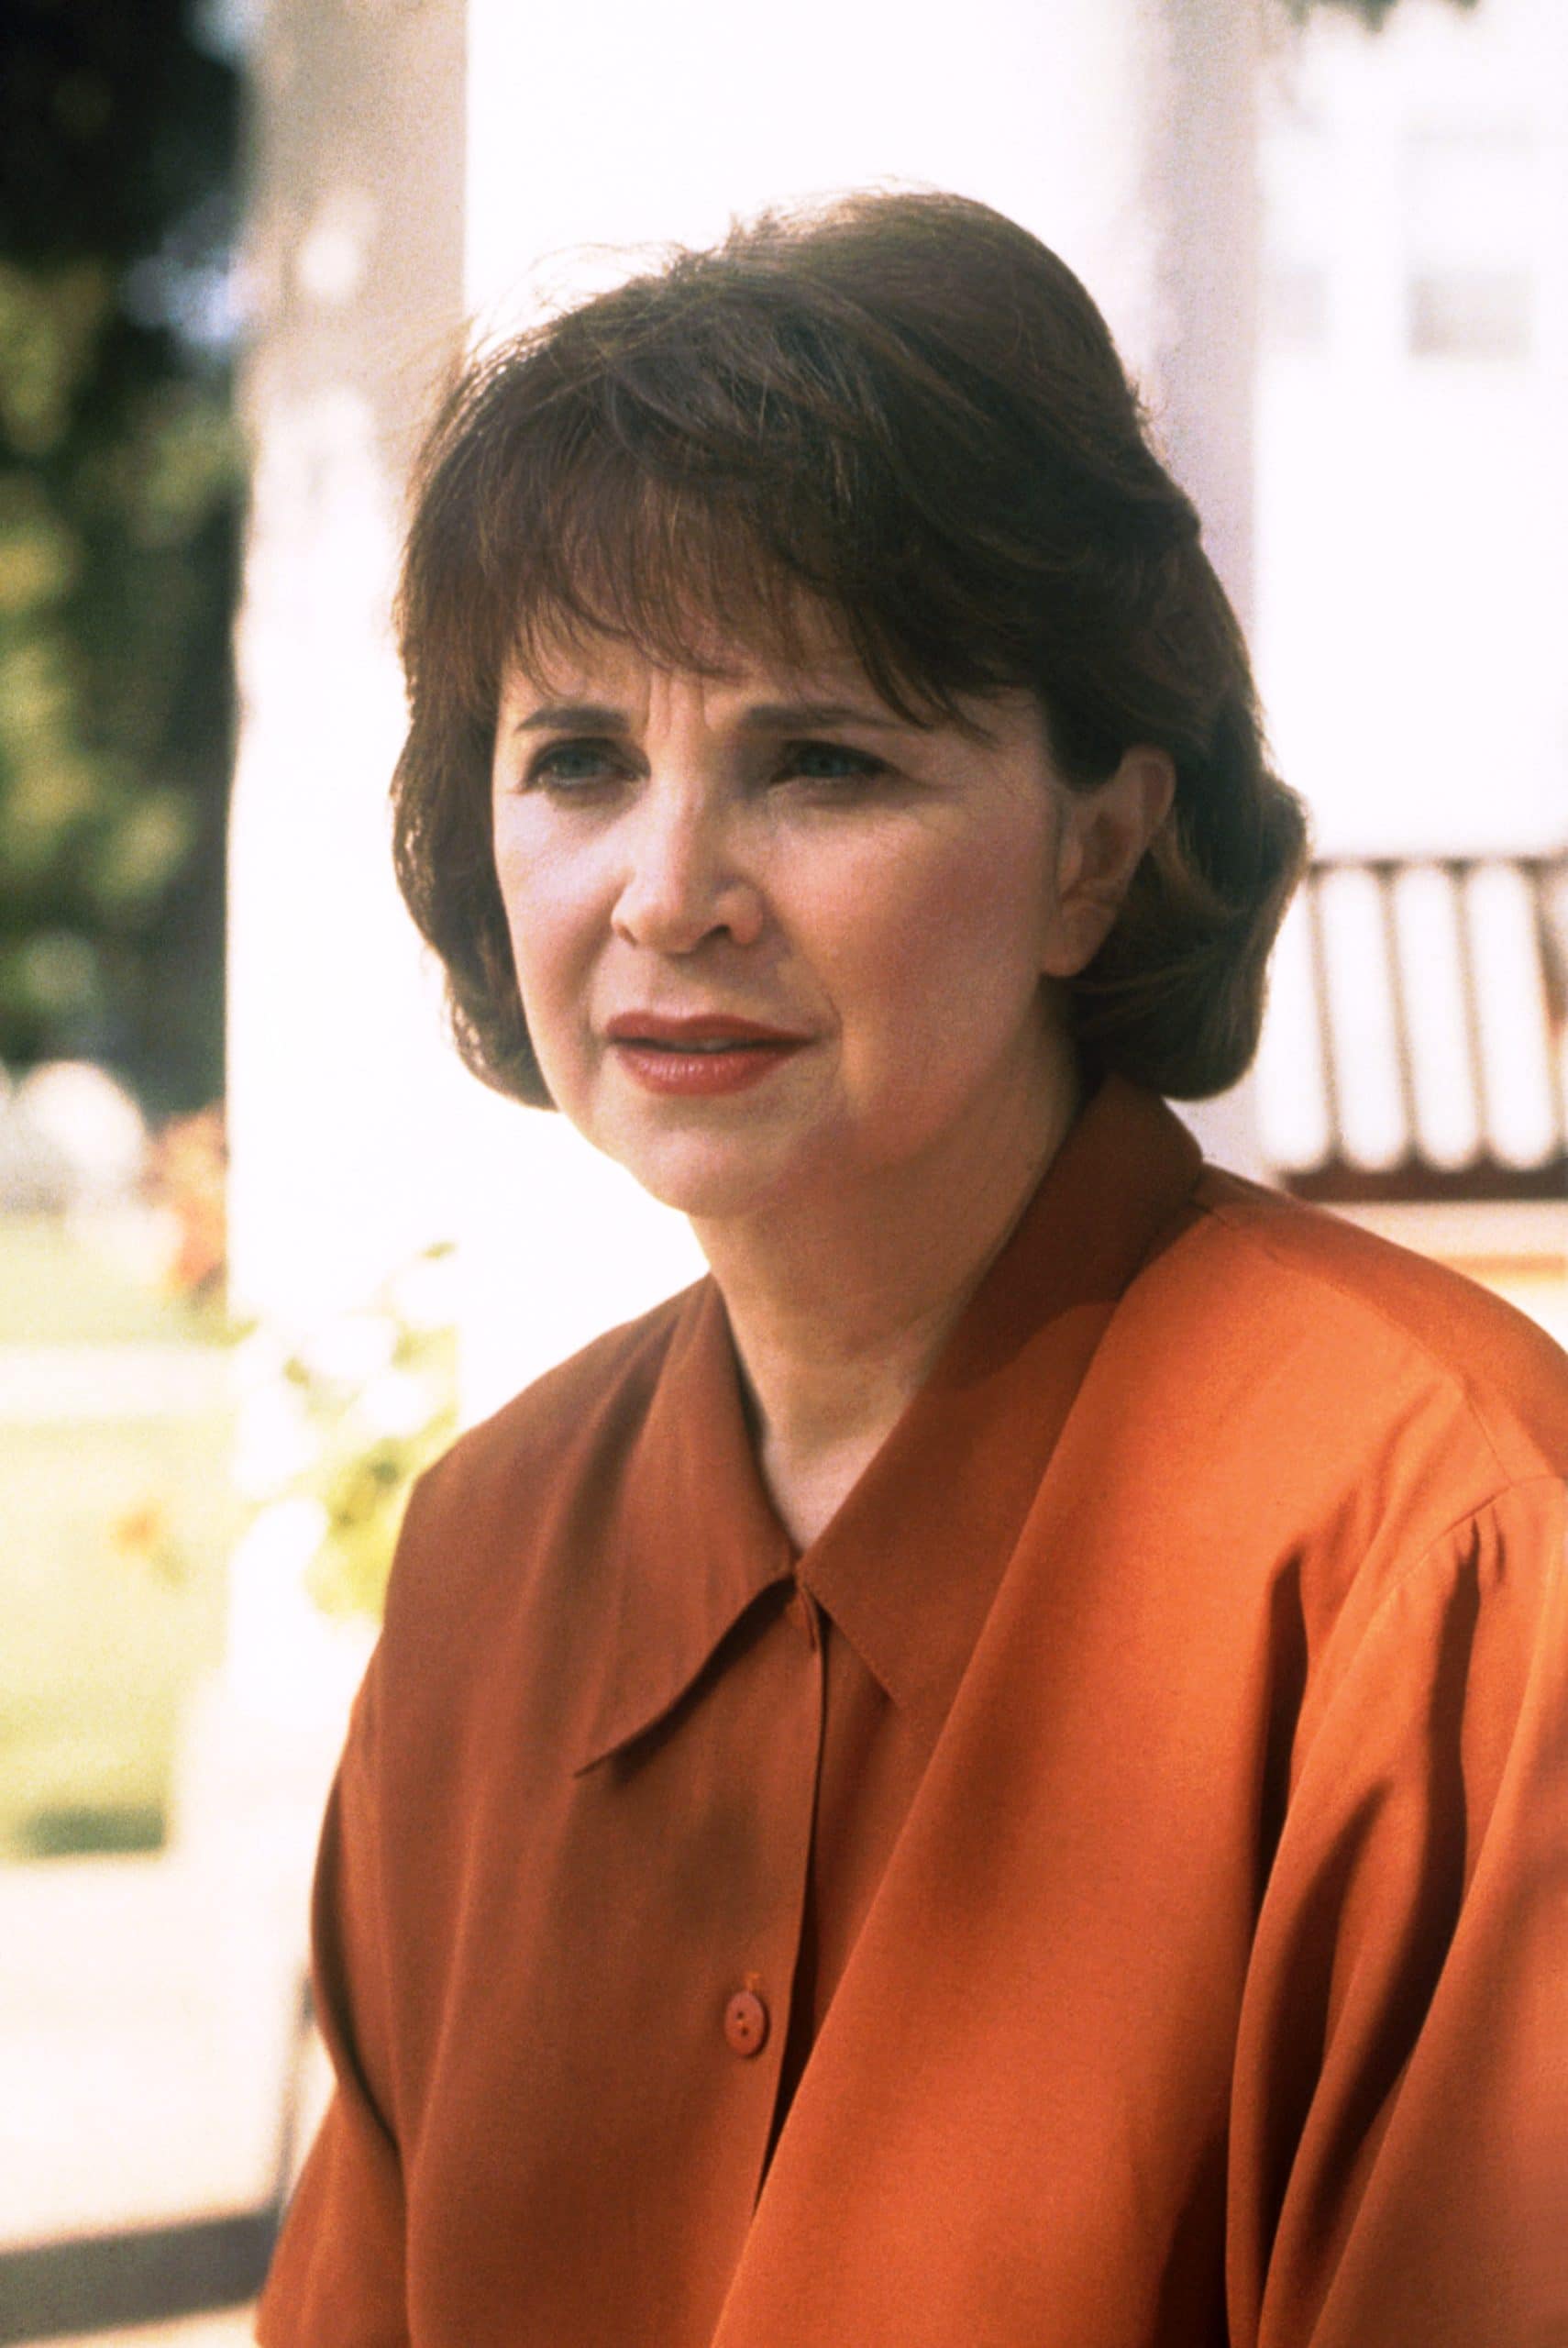 ESCAPE FROM TERROR: THE TERESA STAMPER STORY, Cindy Williams, 1995